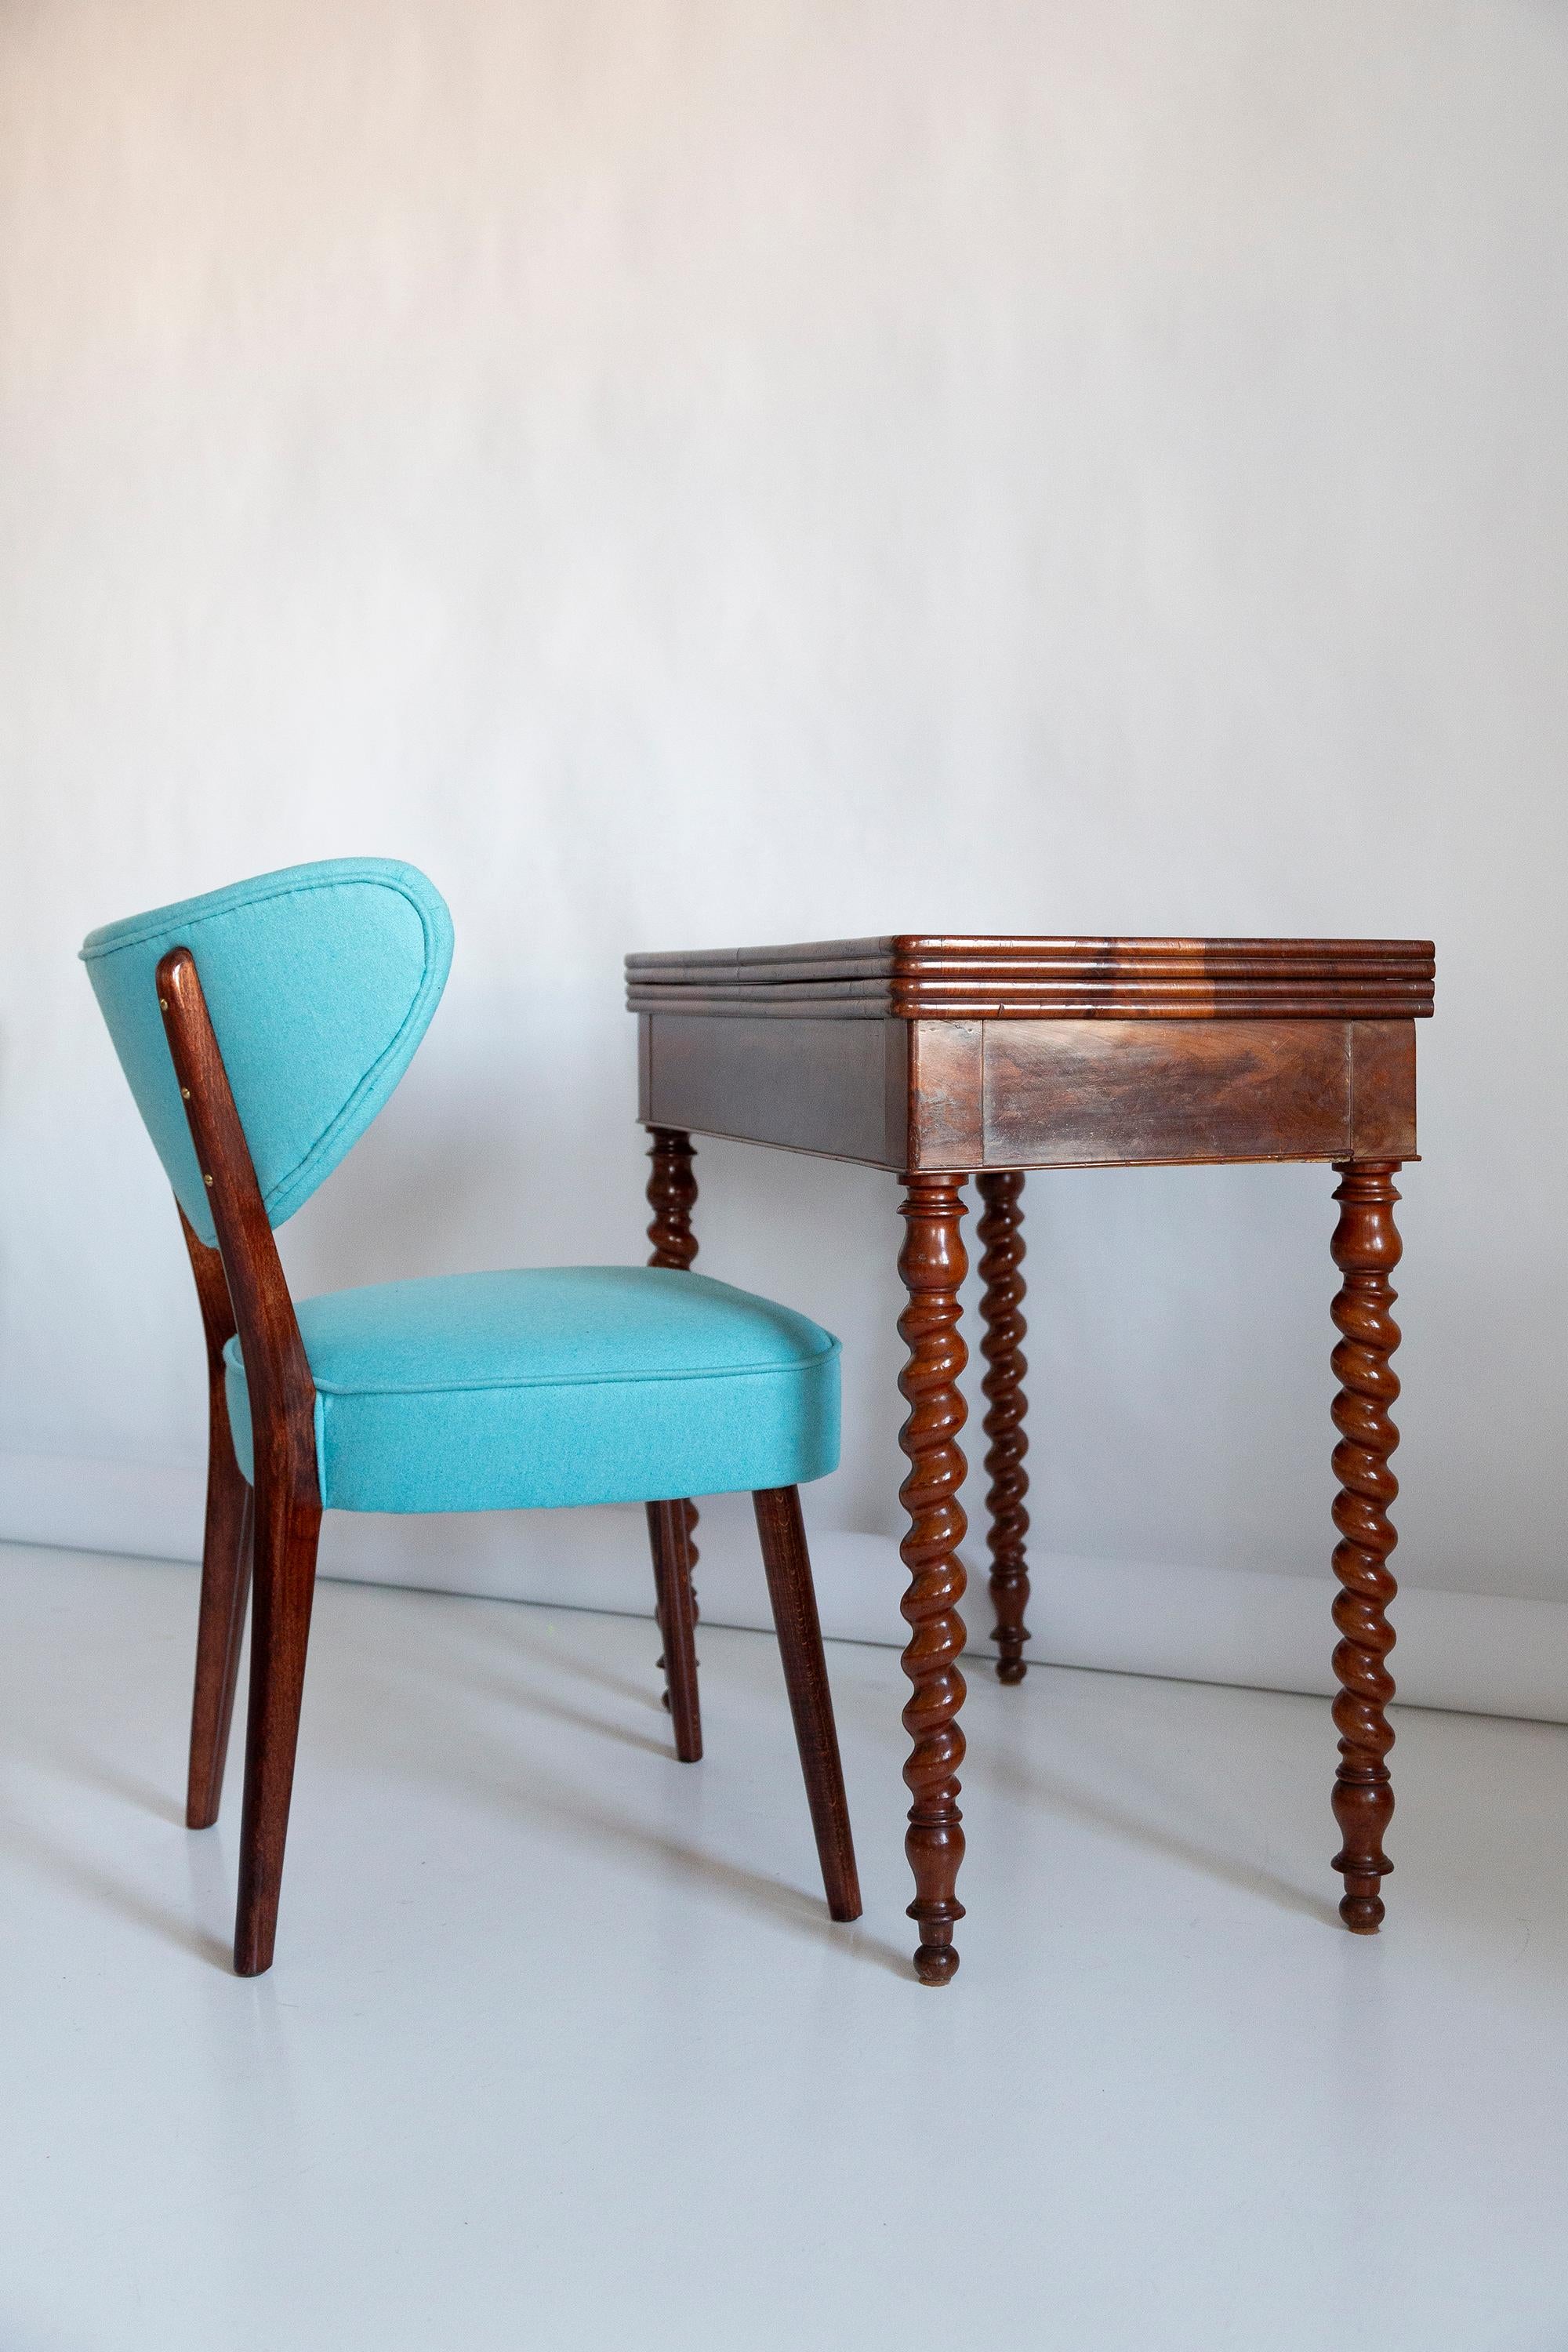 Mid-Century Modern Shell Dining Chair, Turquoise Wool, by Vintola Studio, Europe, Poland For Sale